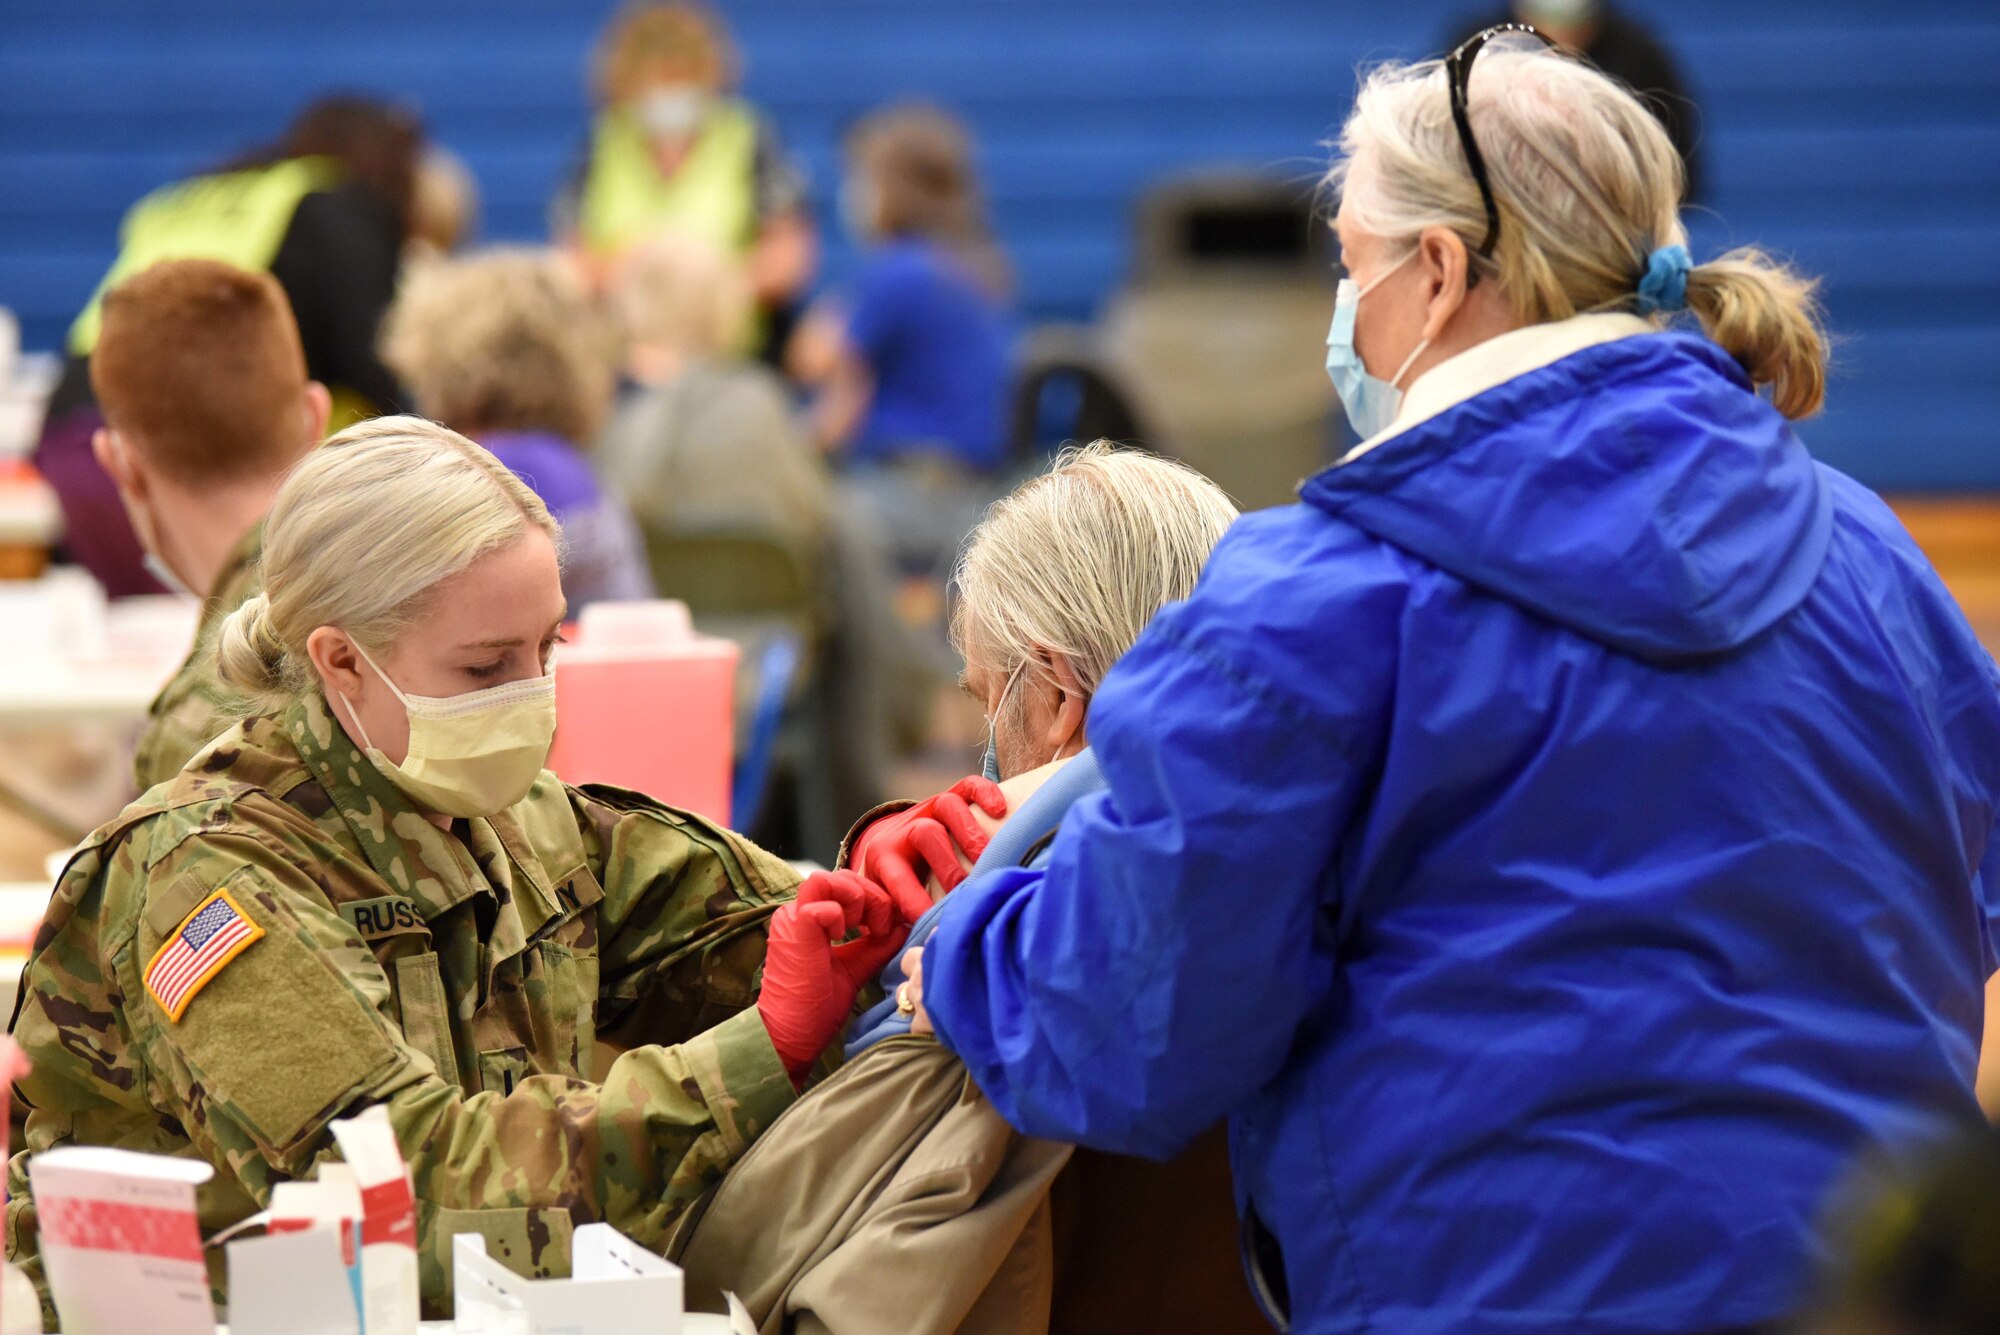 A Michigan Army National Guard Soldier administers a COVID-19 vaccine in Centerville, Michigan, Feb. 17, 2021. The Michigan Department of Health and Human Services and Michigan National Guard have been working throughout the pandemic to increase access to vaccinations across the state.